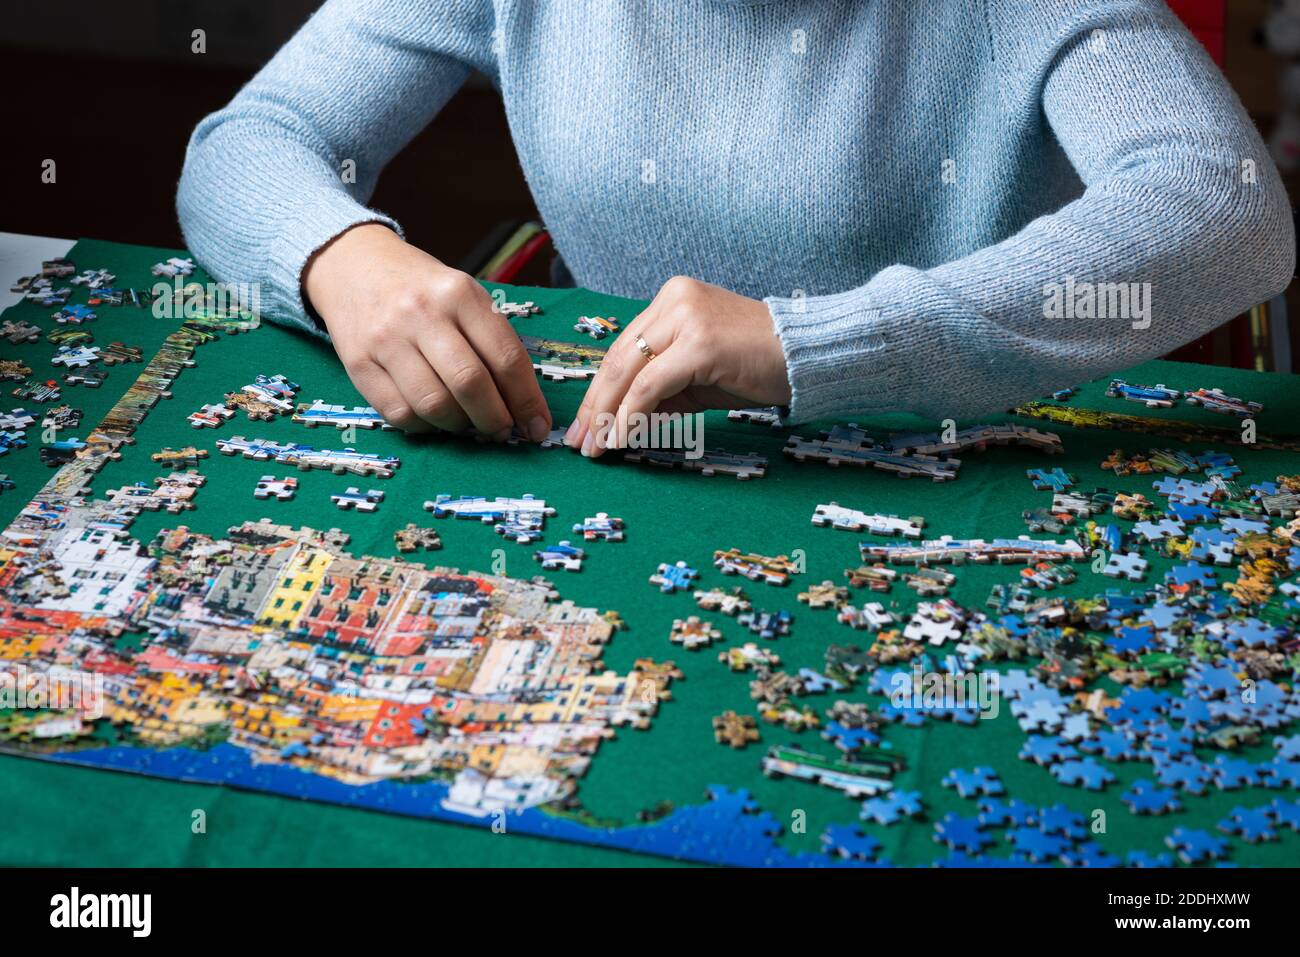 Woman works on a jigsaw puzzle Stock Photo